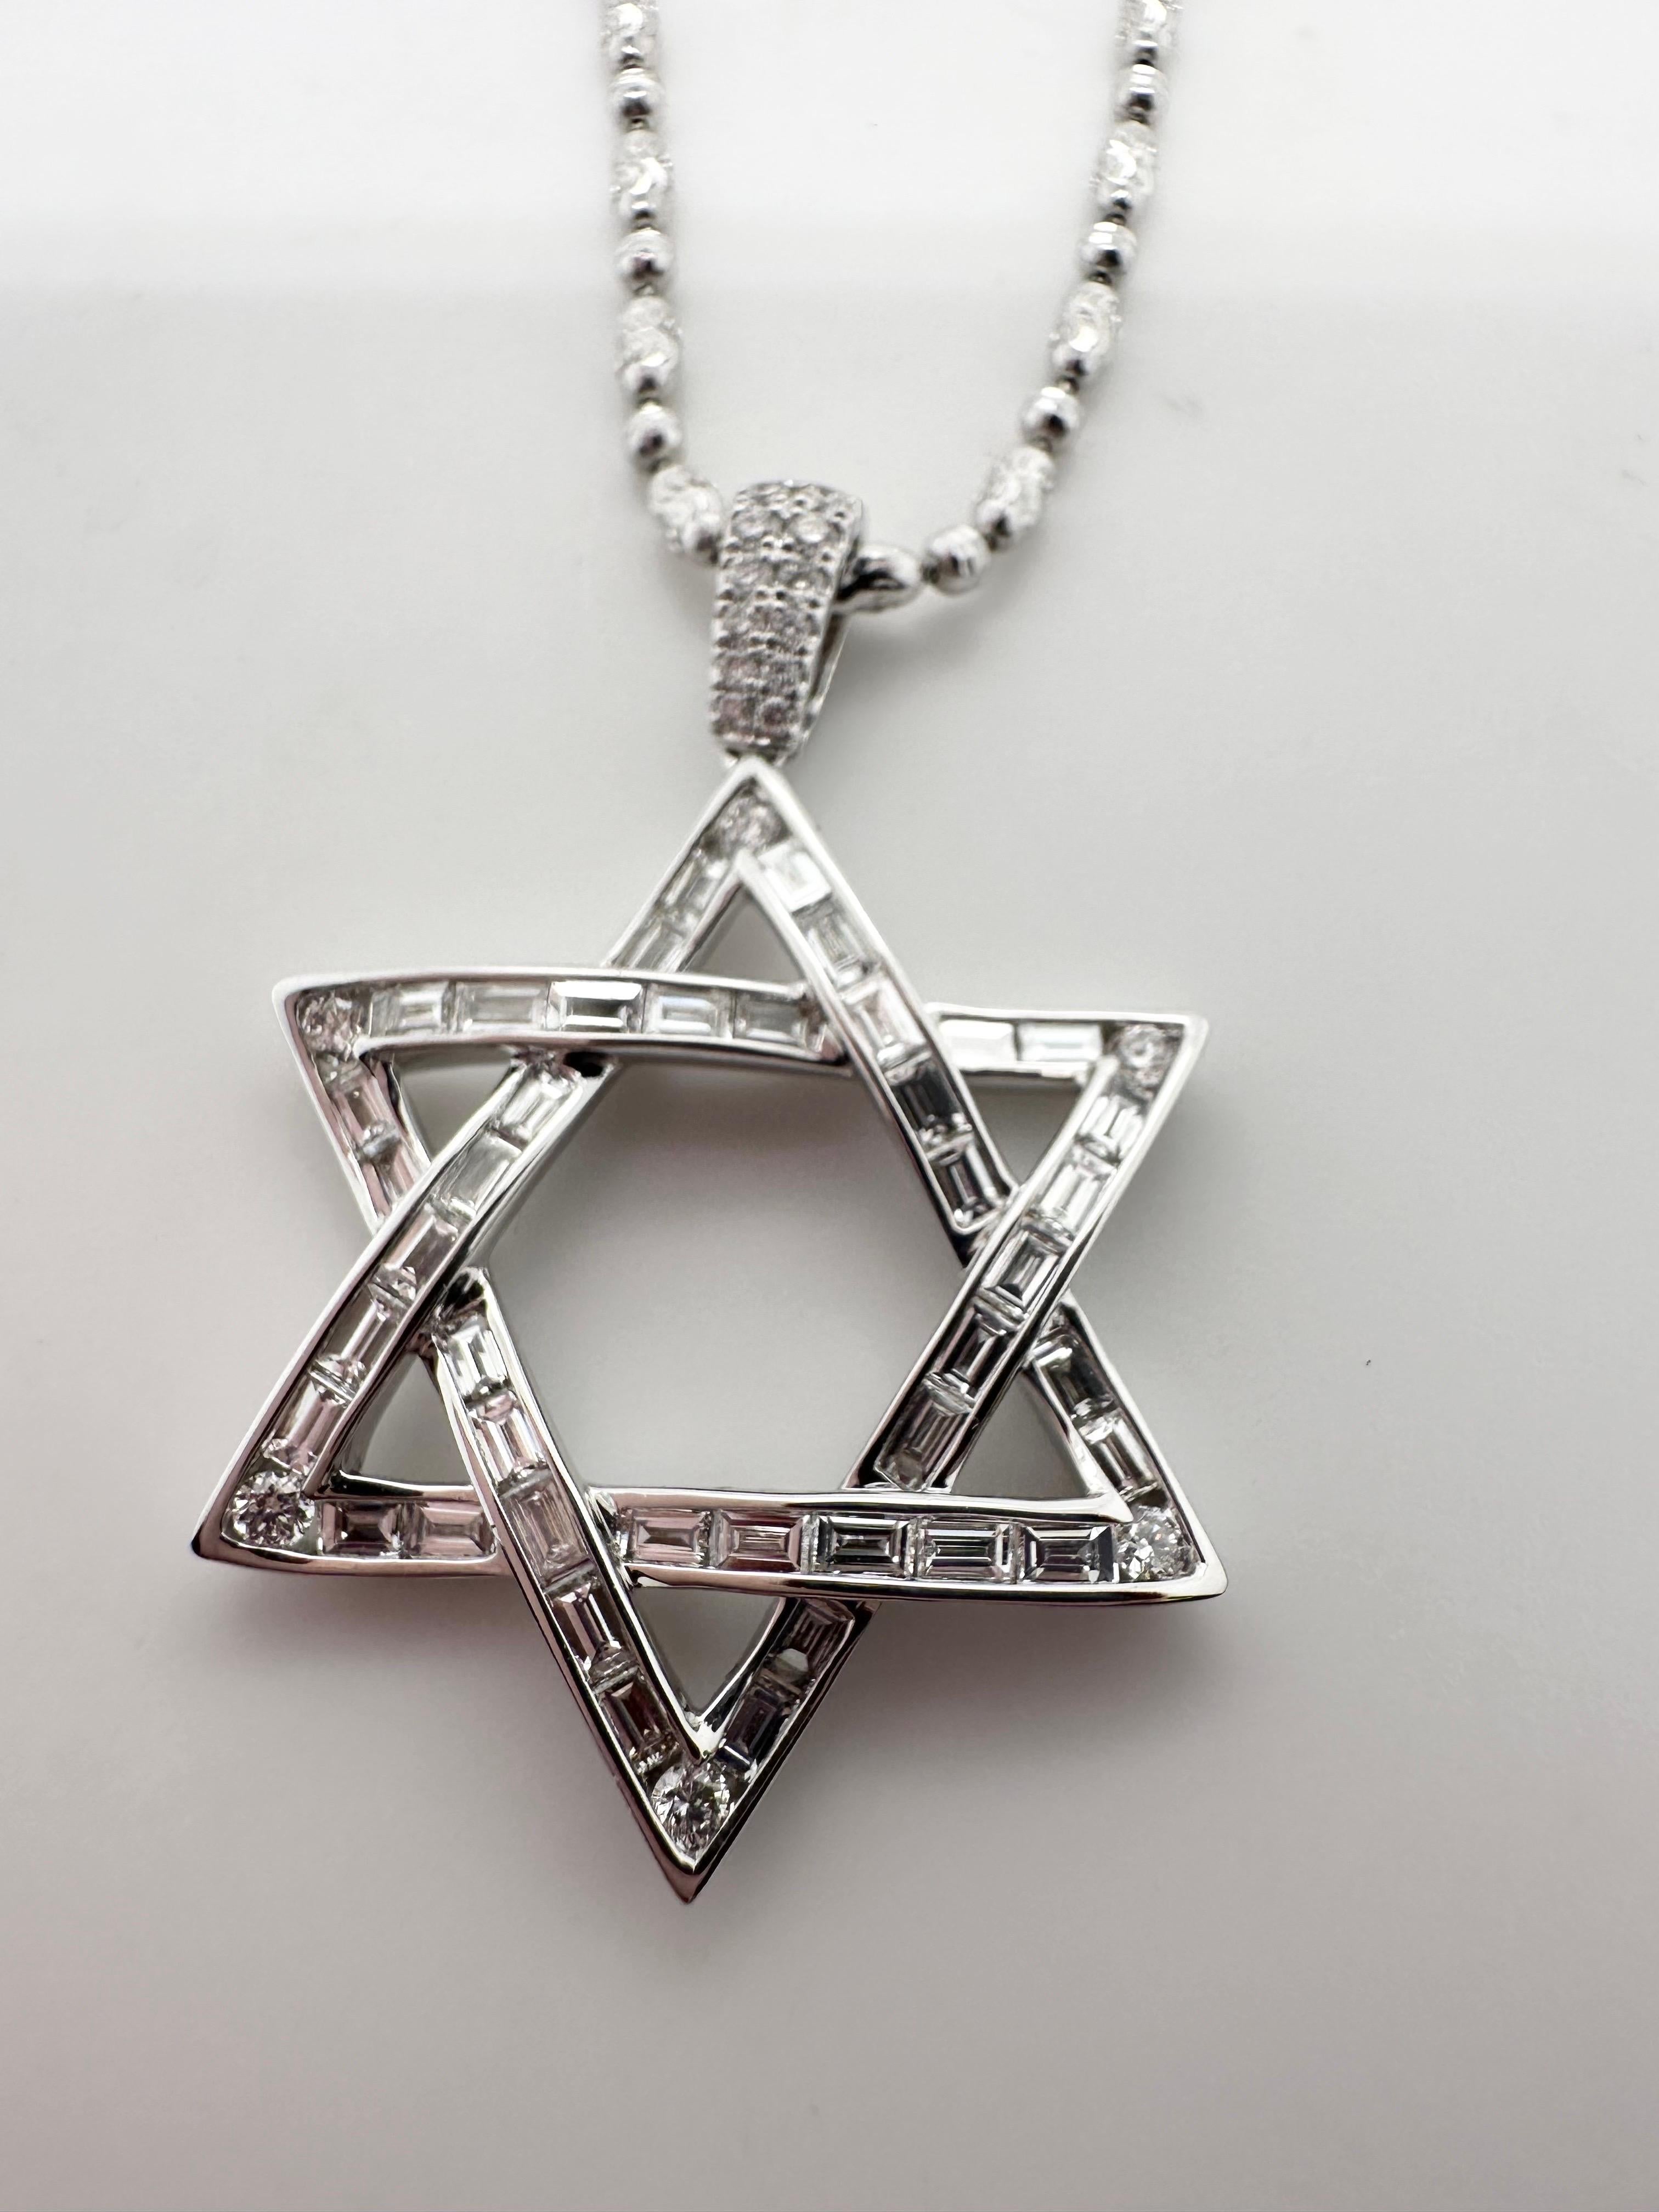 Large Star of David pendant necklace in 18KT white gold, made with natural diamonds 1.18ct VS clarity and F color, chain is 16